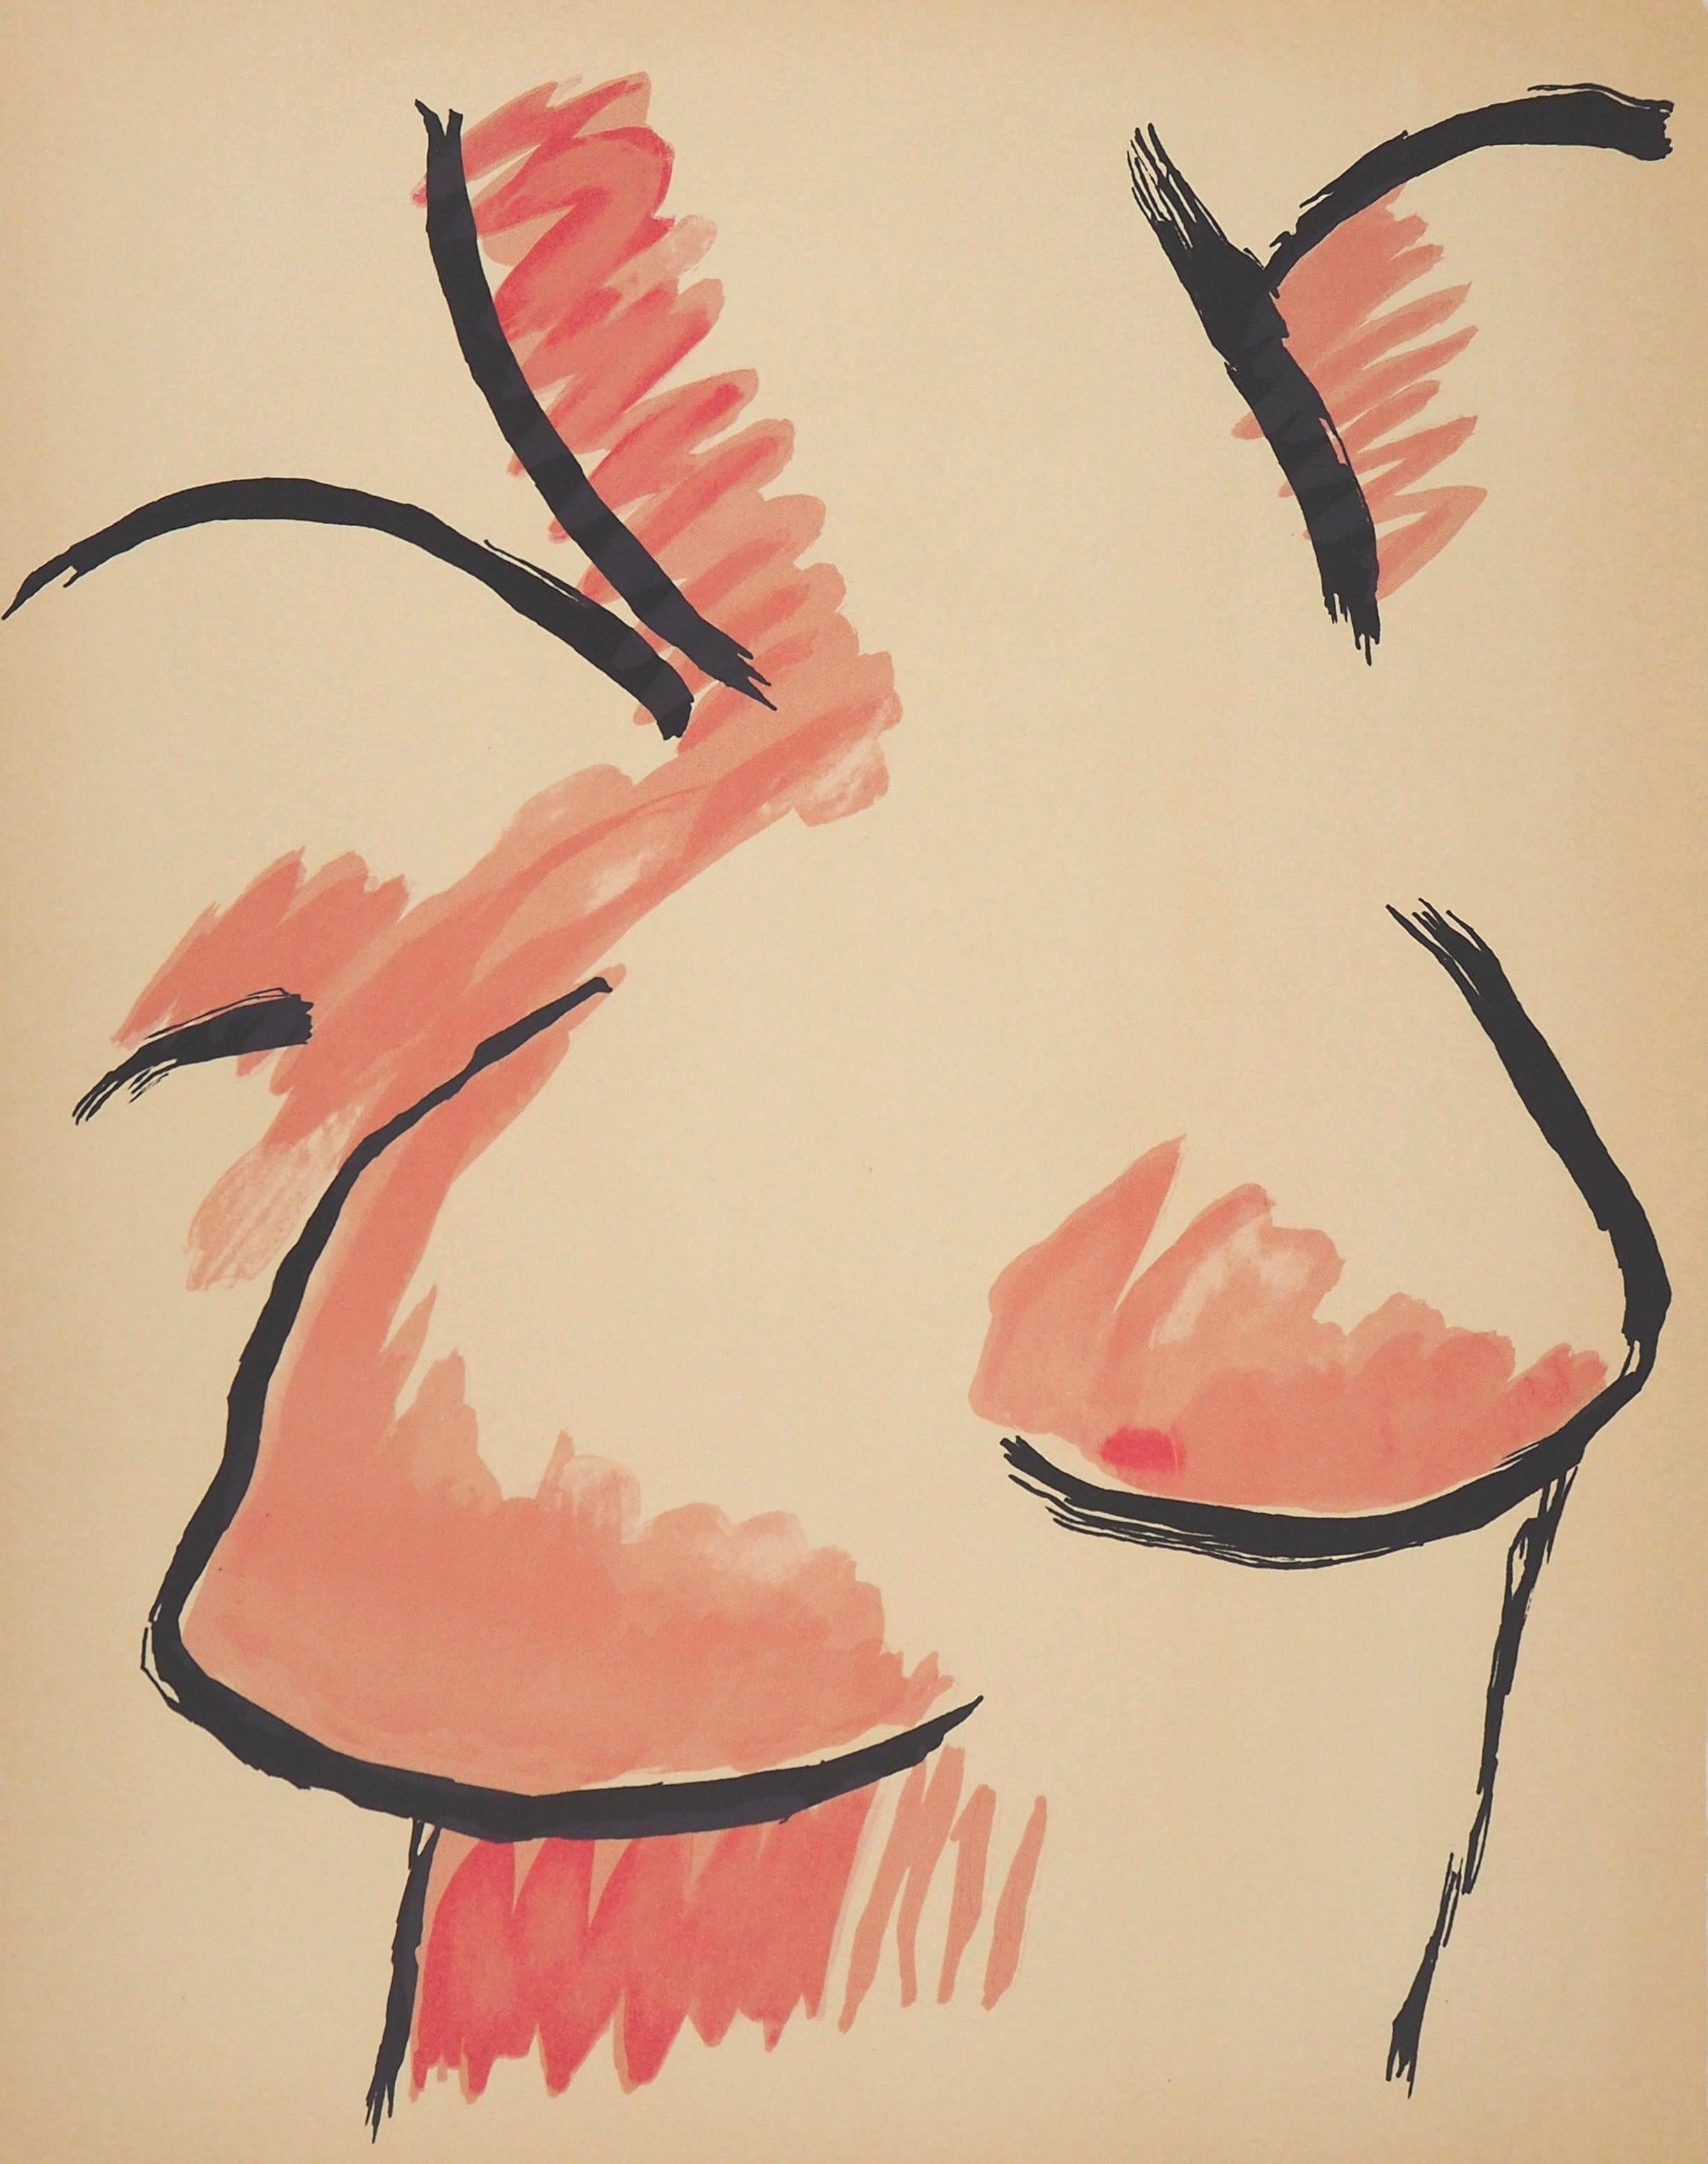 Female Bust - Handsigned Original Lithograph - Surrealist Print by Man Ray